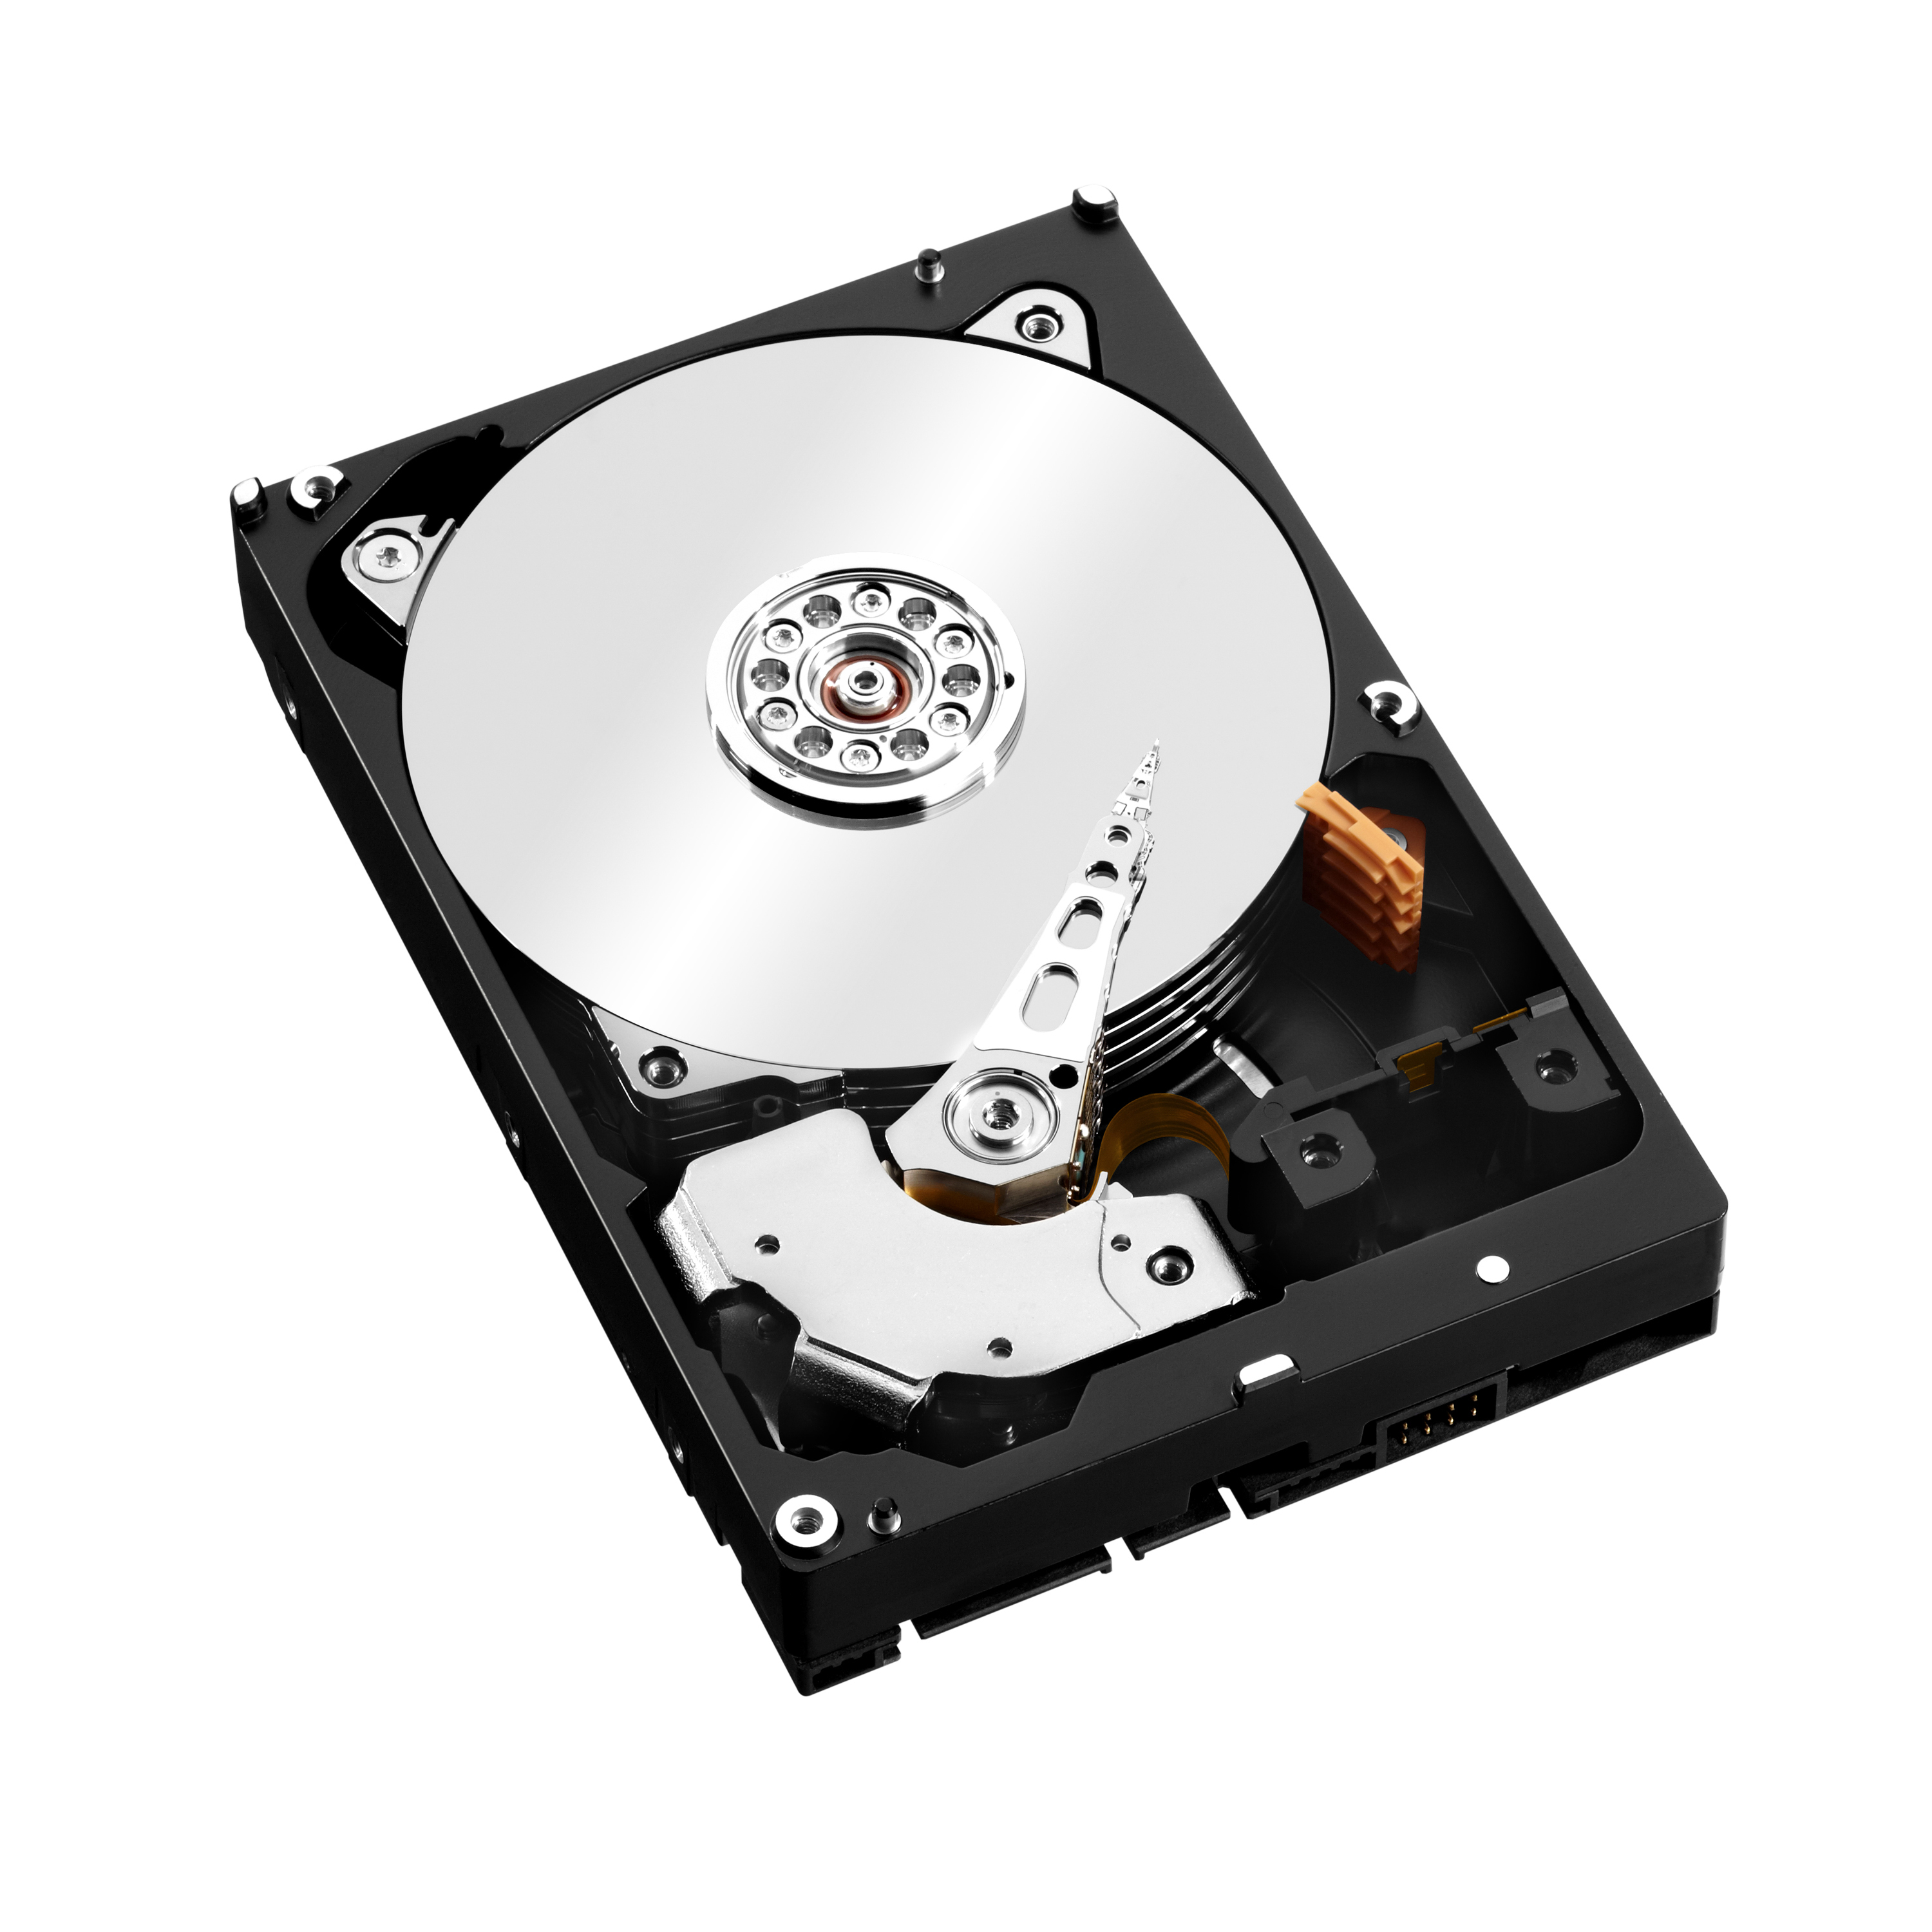 WD Red Pro 2TB HDD (WD2002FFSX)